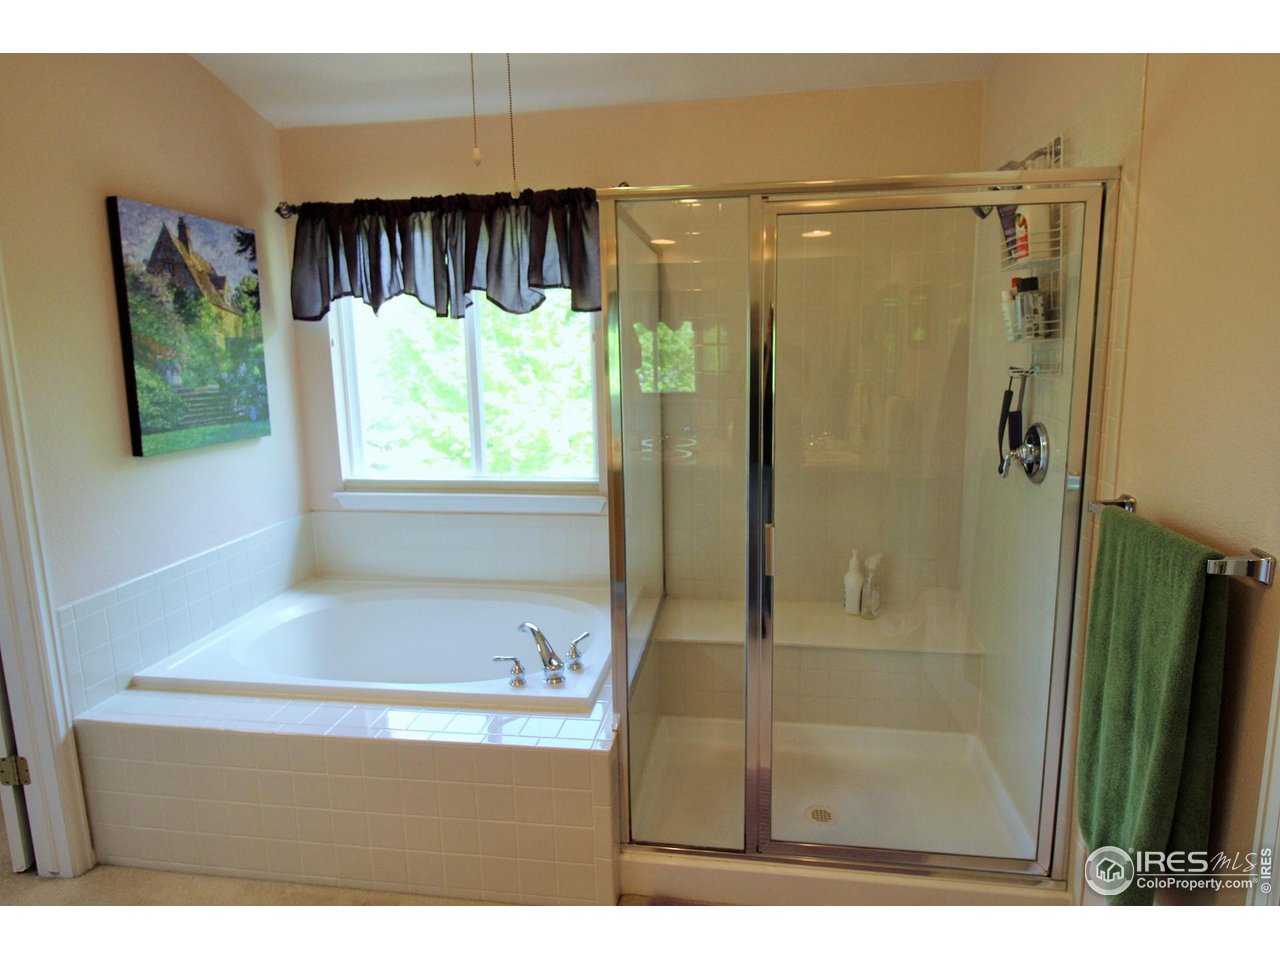 Private 5-piece master bath with soaking tub and big shower with built-in shower seat.